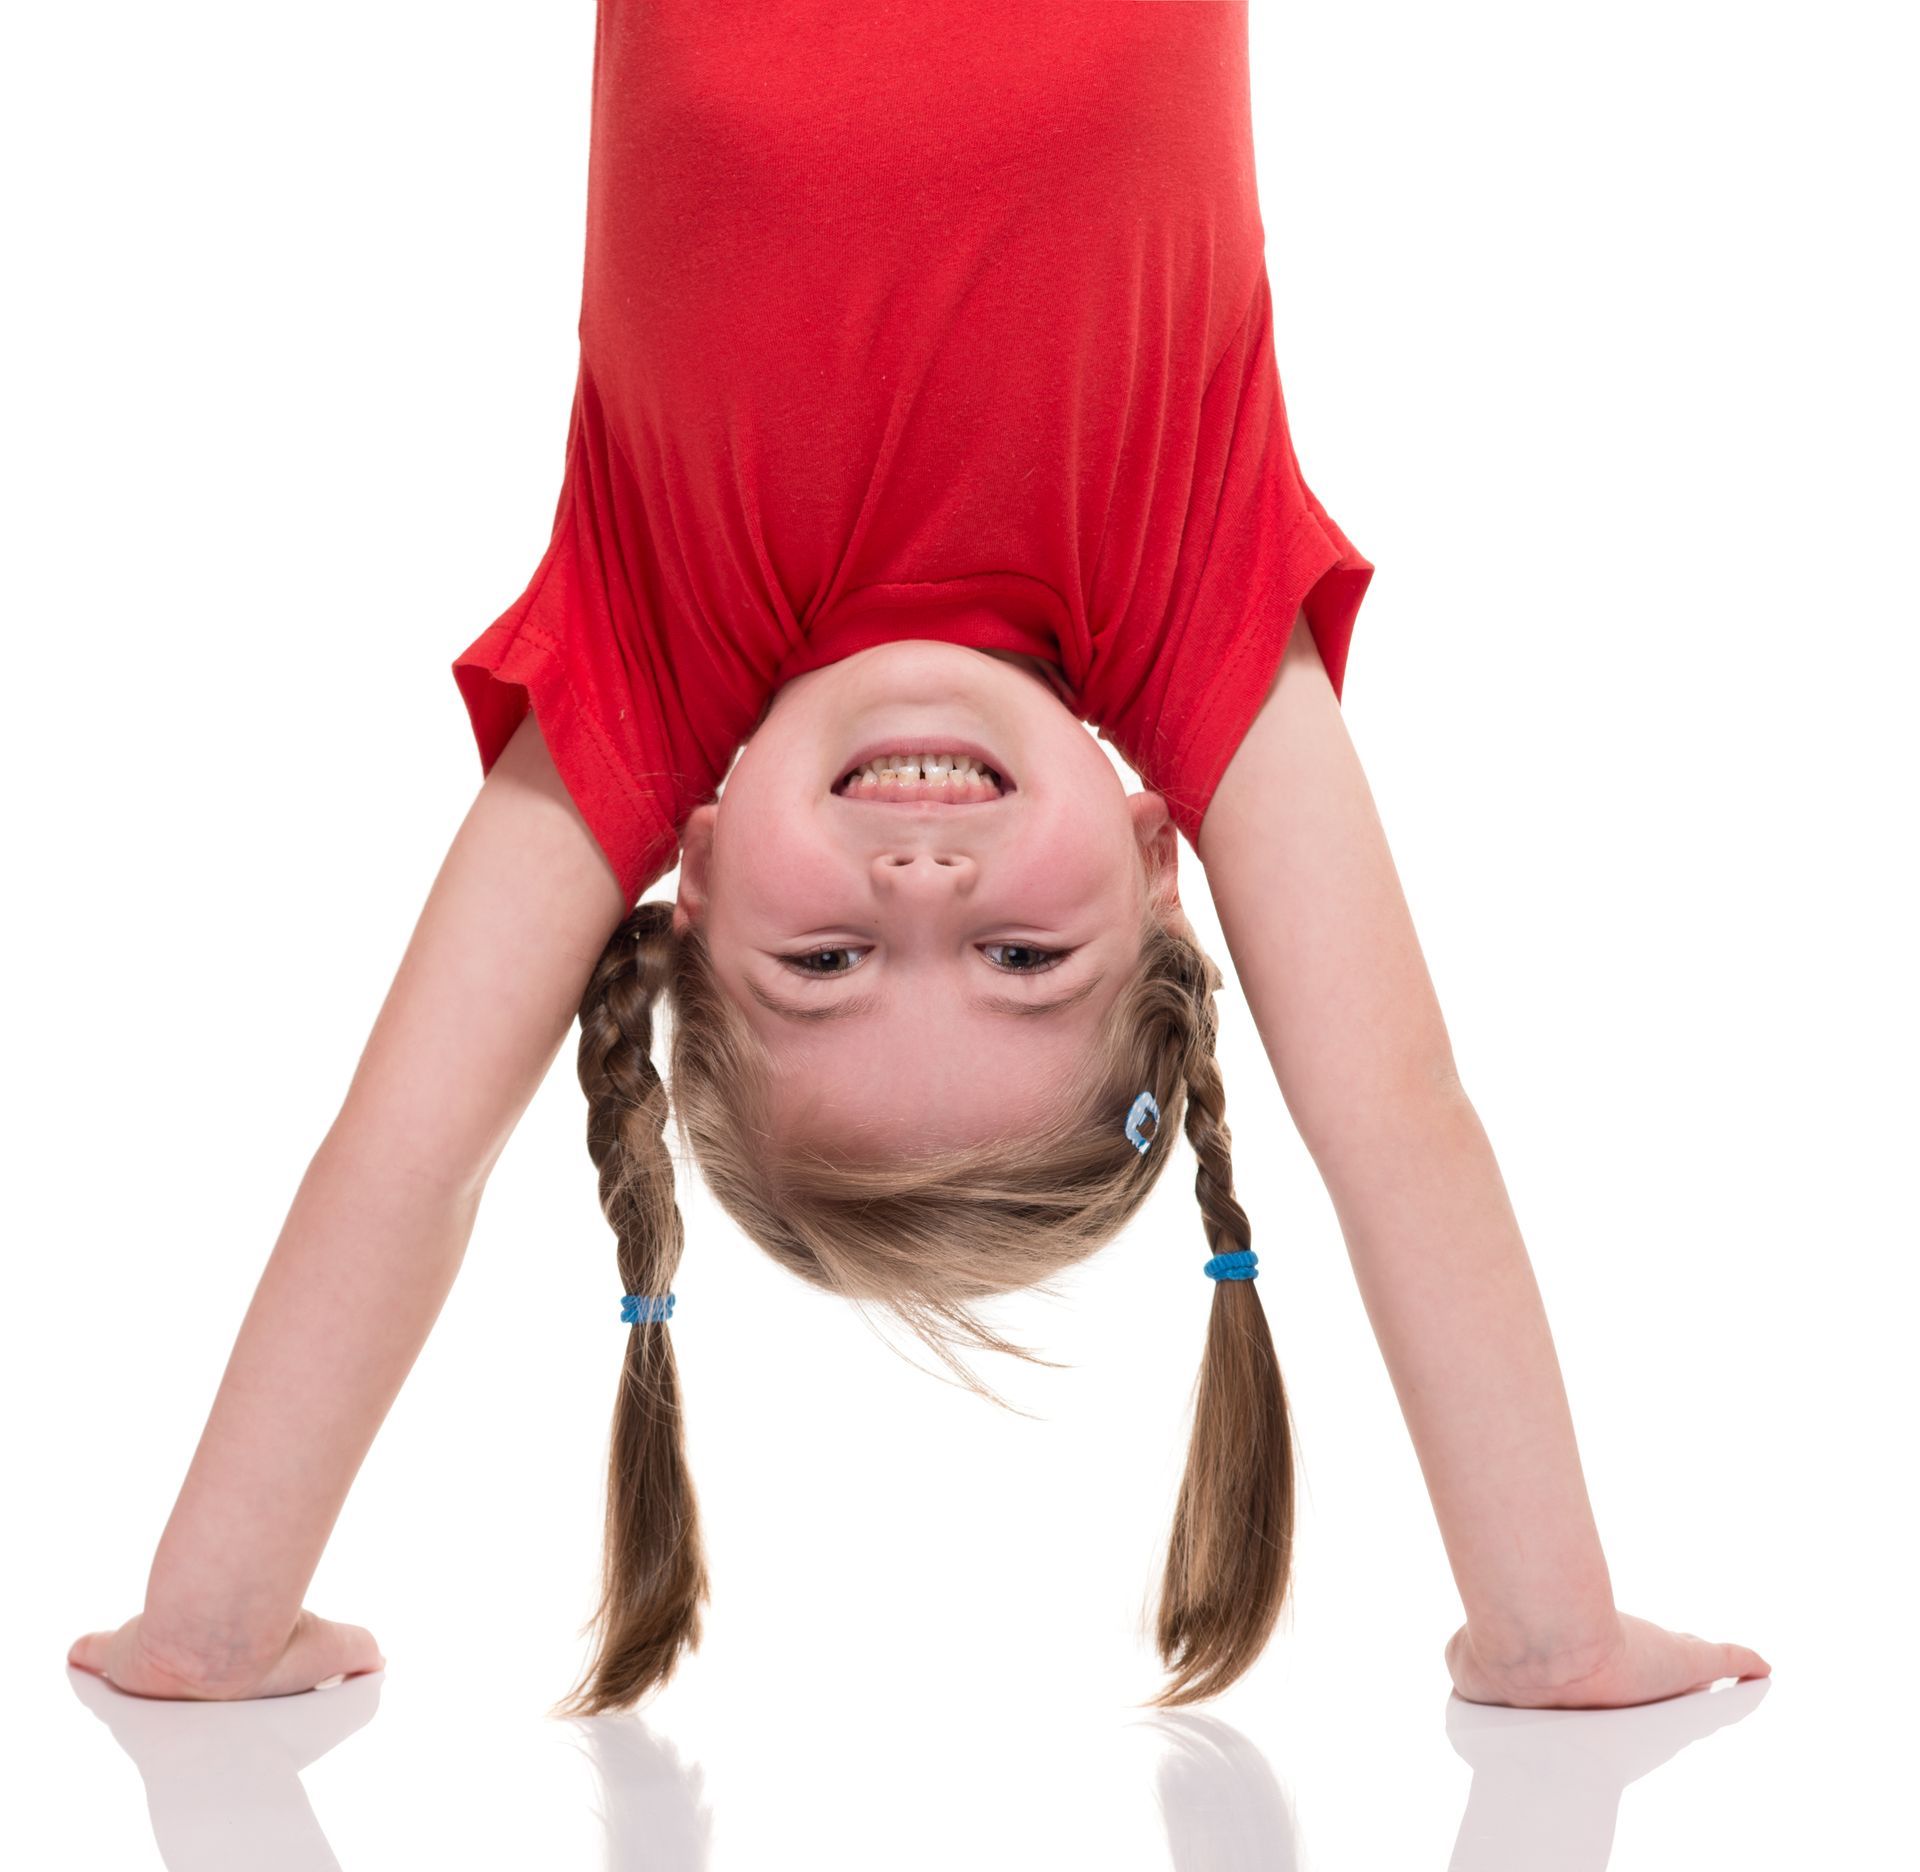 Young girl smiling doing handstand